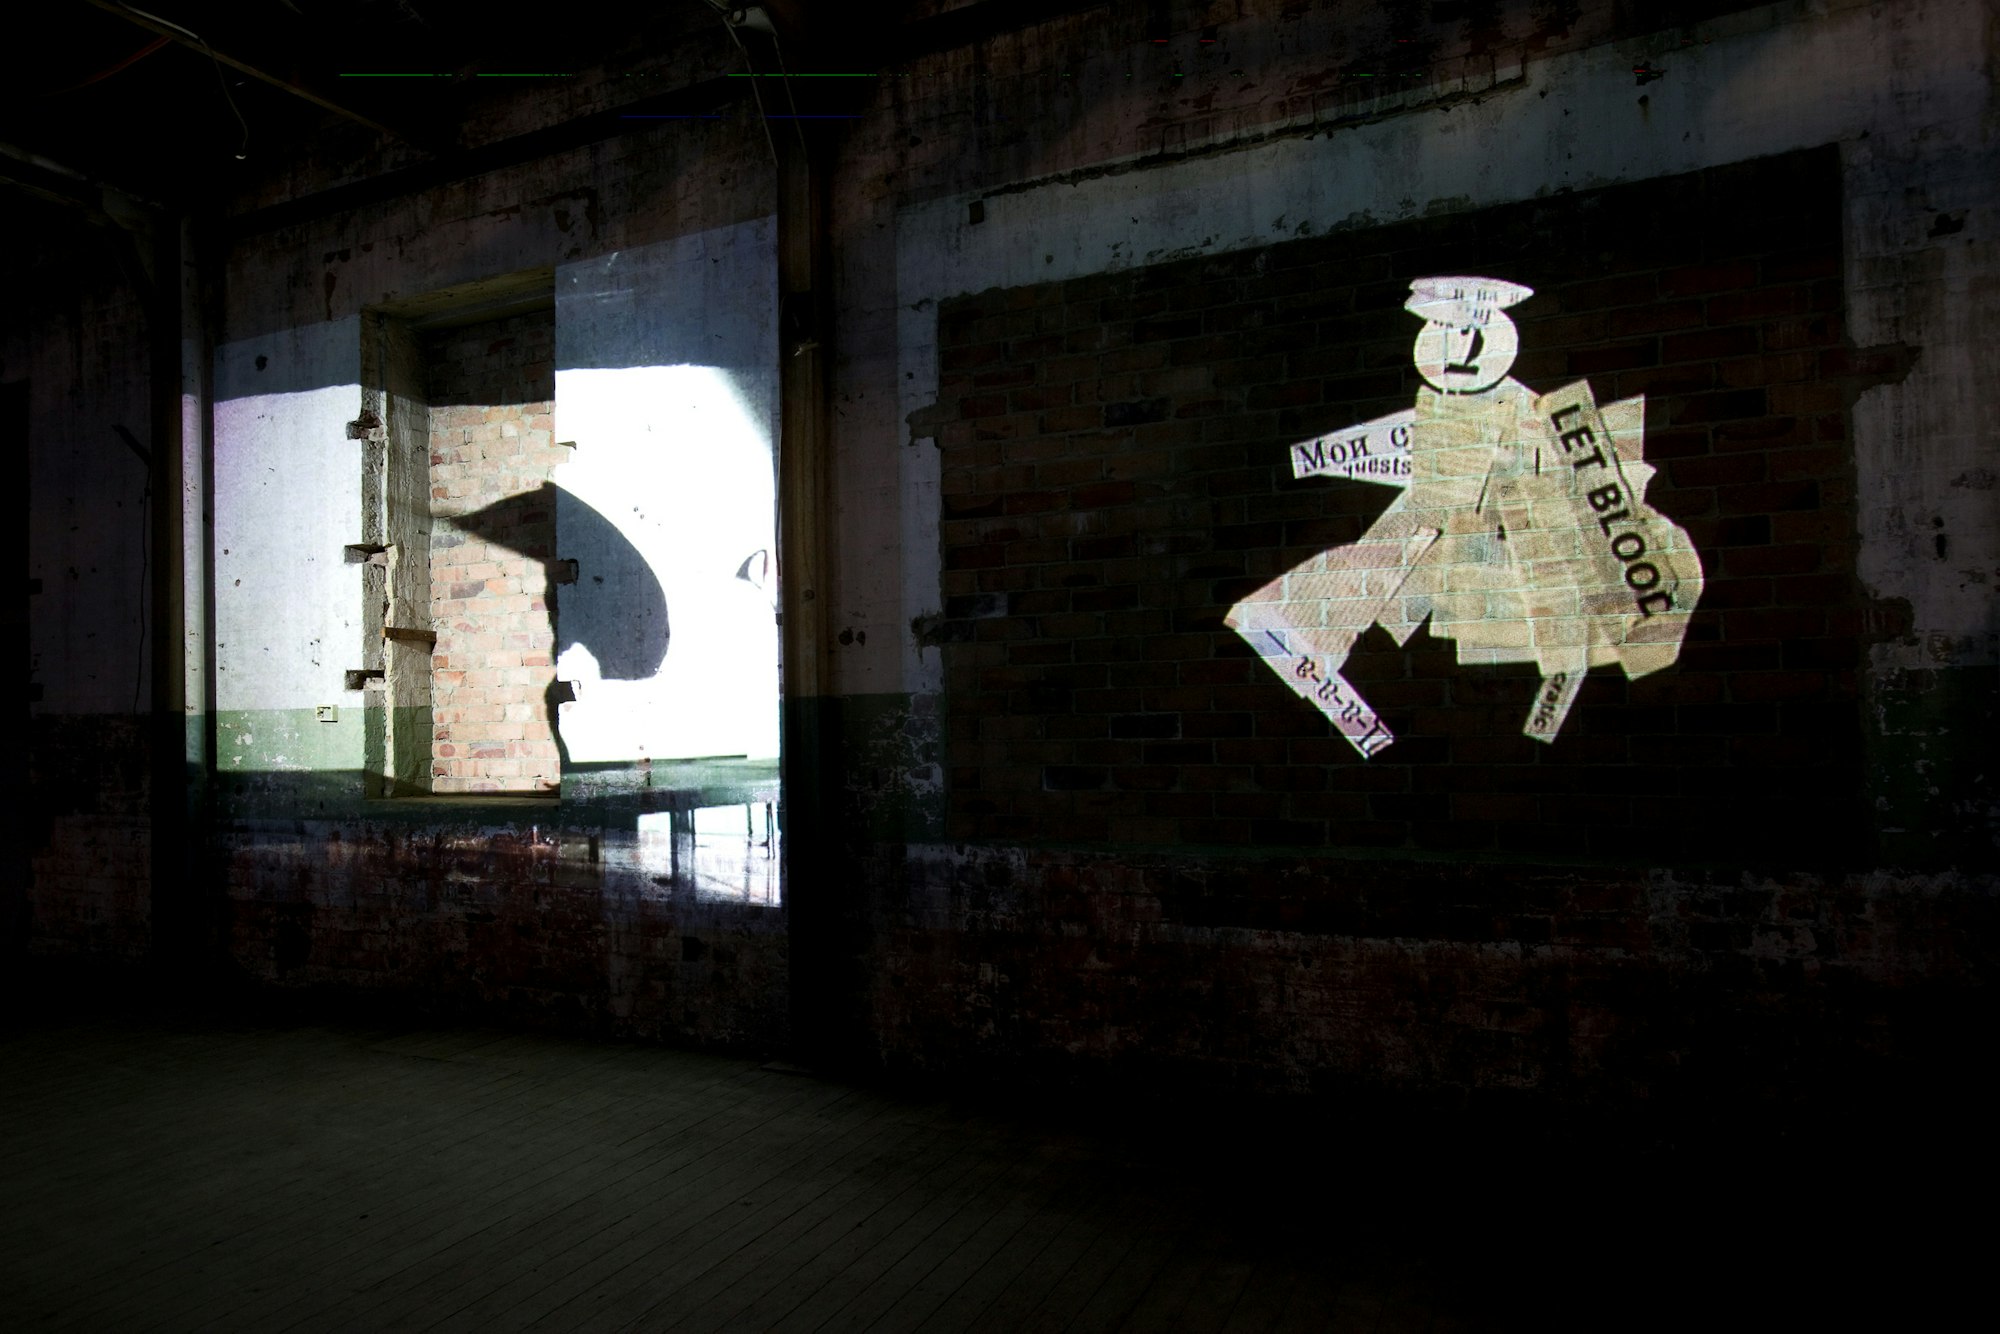 A projection on a wall showing a figure made out of newspaper cuttings.